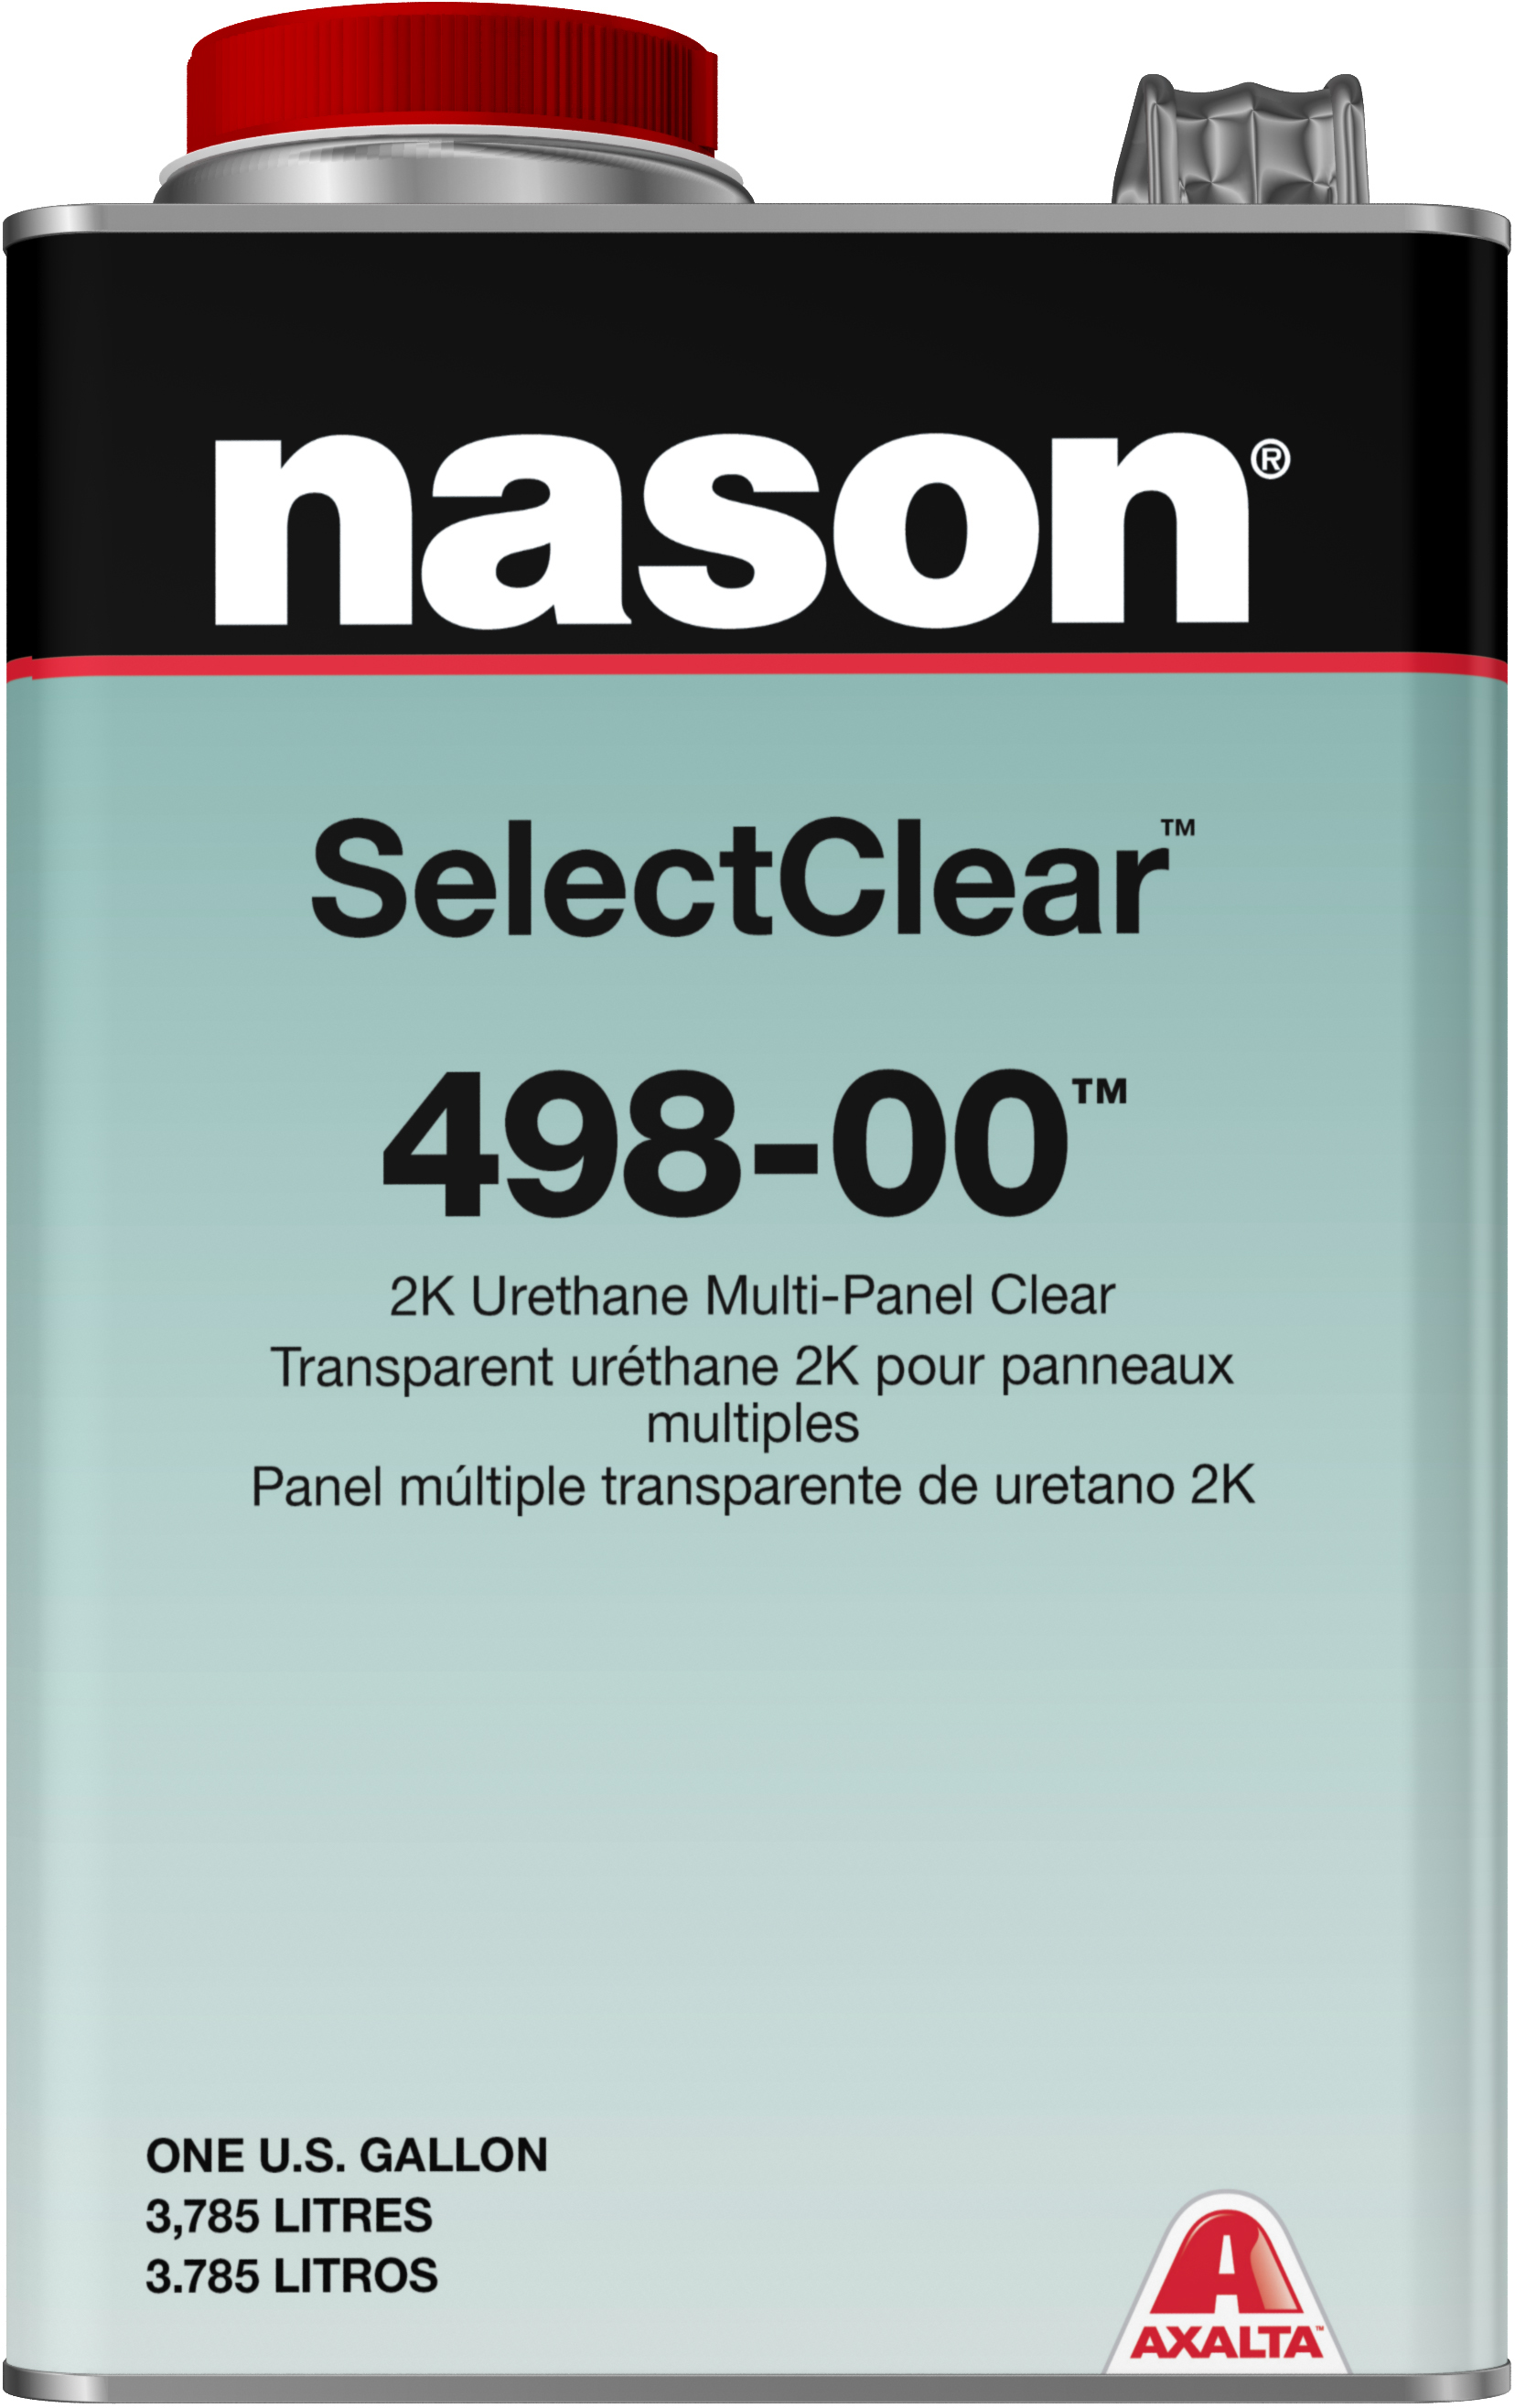 NAS 498 00 SelectClear 2K Urethane Multi Panel Clear